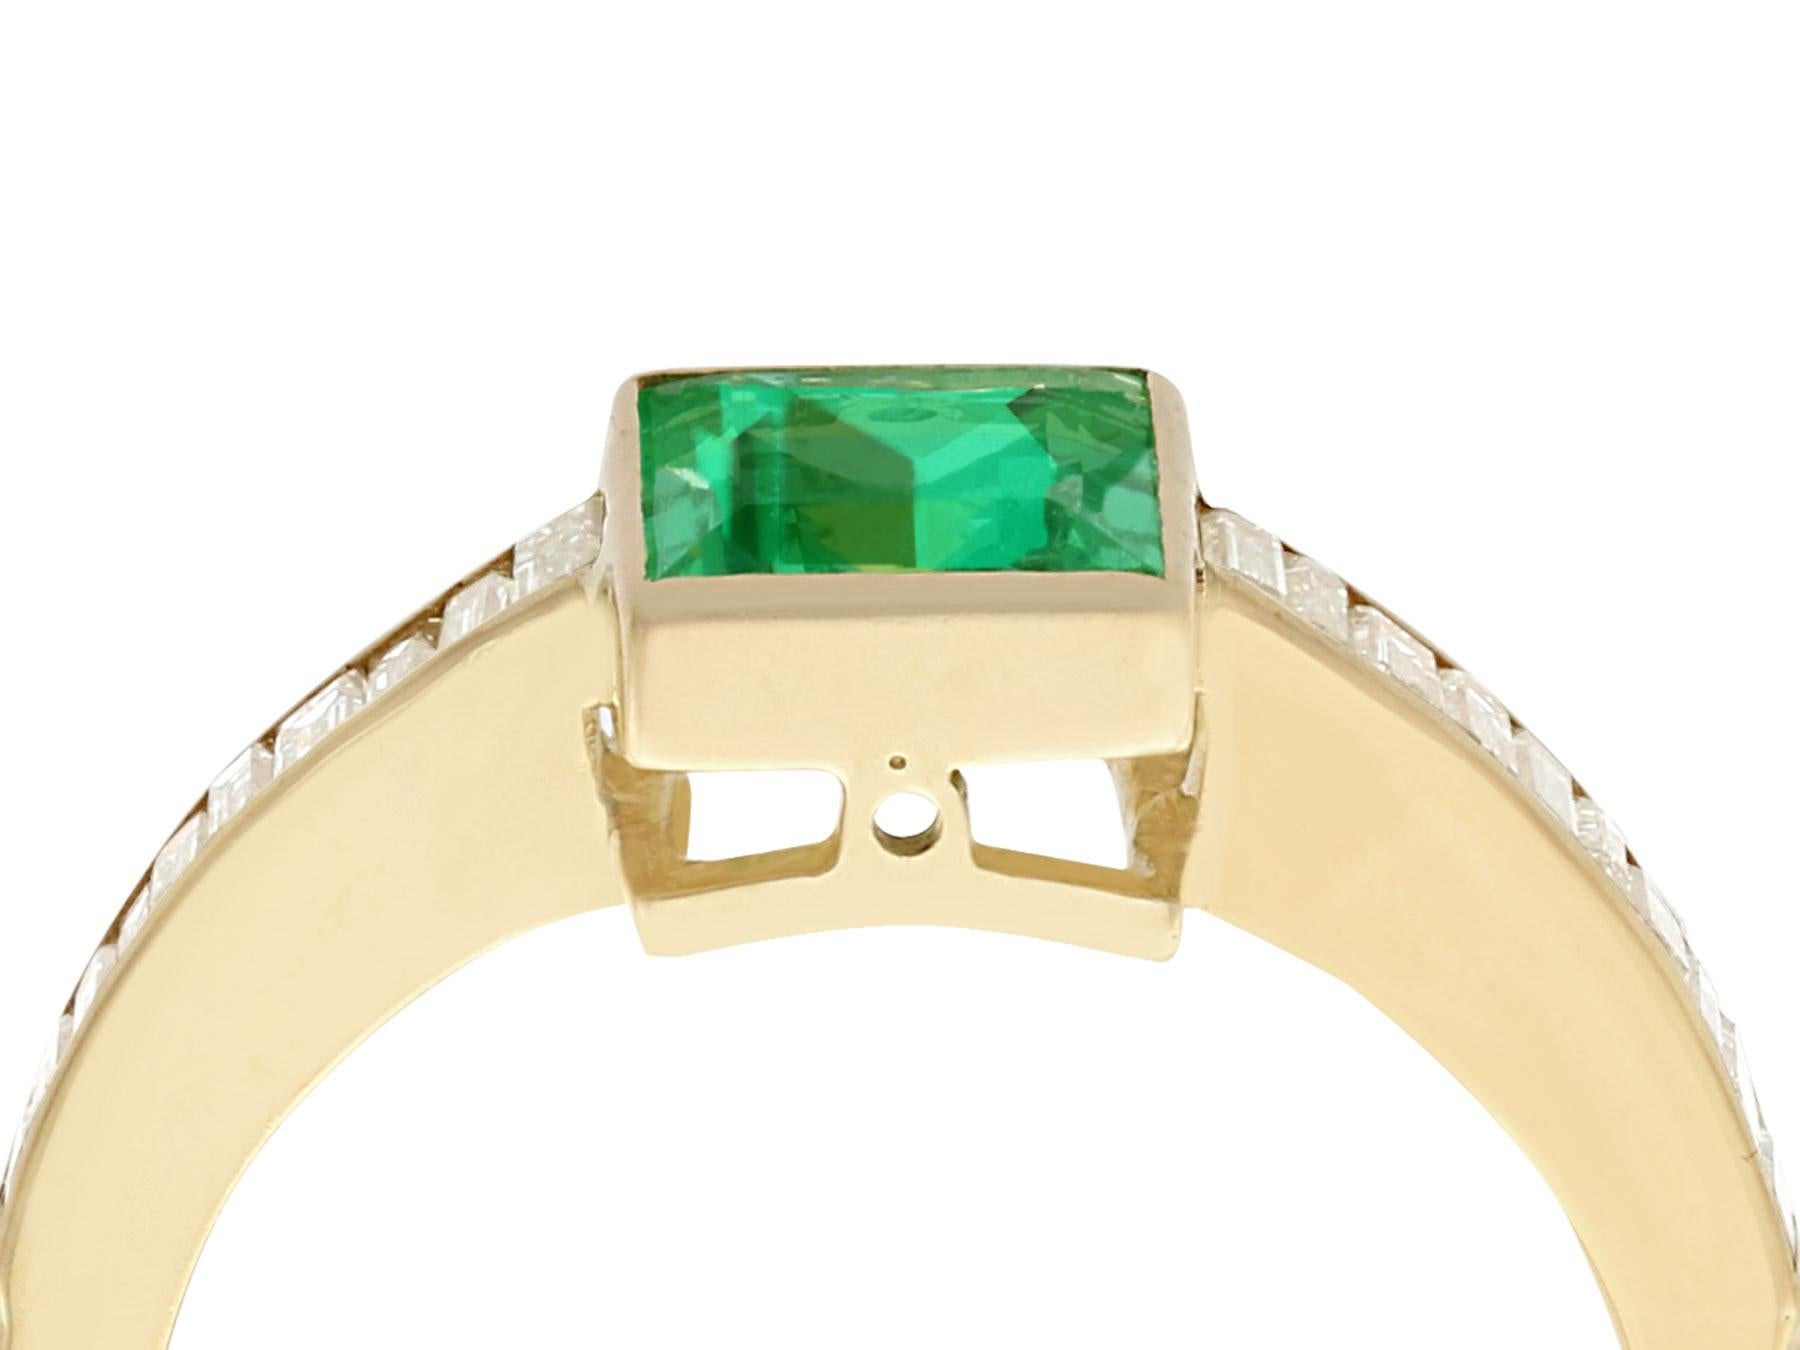 A fine and impressive 1.10 carat emerald, 0.45 carat diamond and 18 karat yellow gold cocktail ring; part of our diverse antique jewelry and estate jewelry collections

This fine and impressive emerald and diamond ring has been crafted in 18k yellow